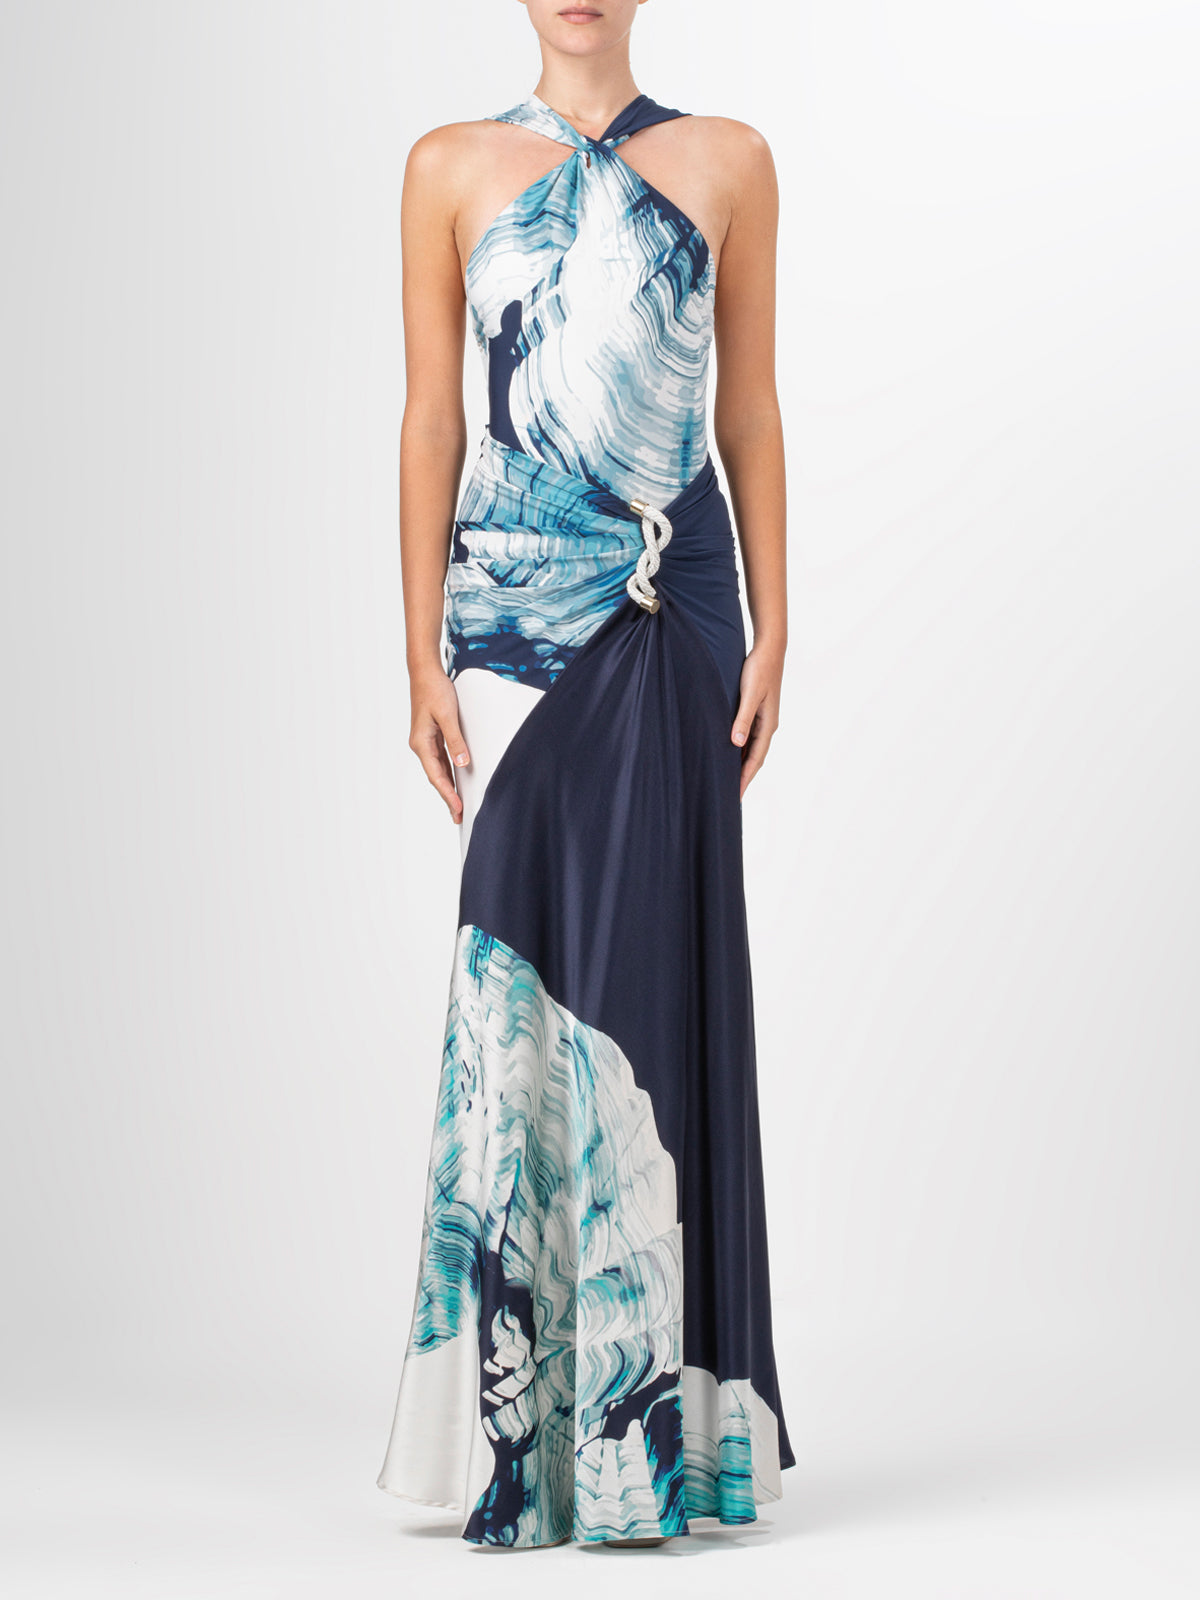 A Alisha One Piece Navy Abstract Wave with an abstract blue and white print made of lycra fabric.